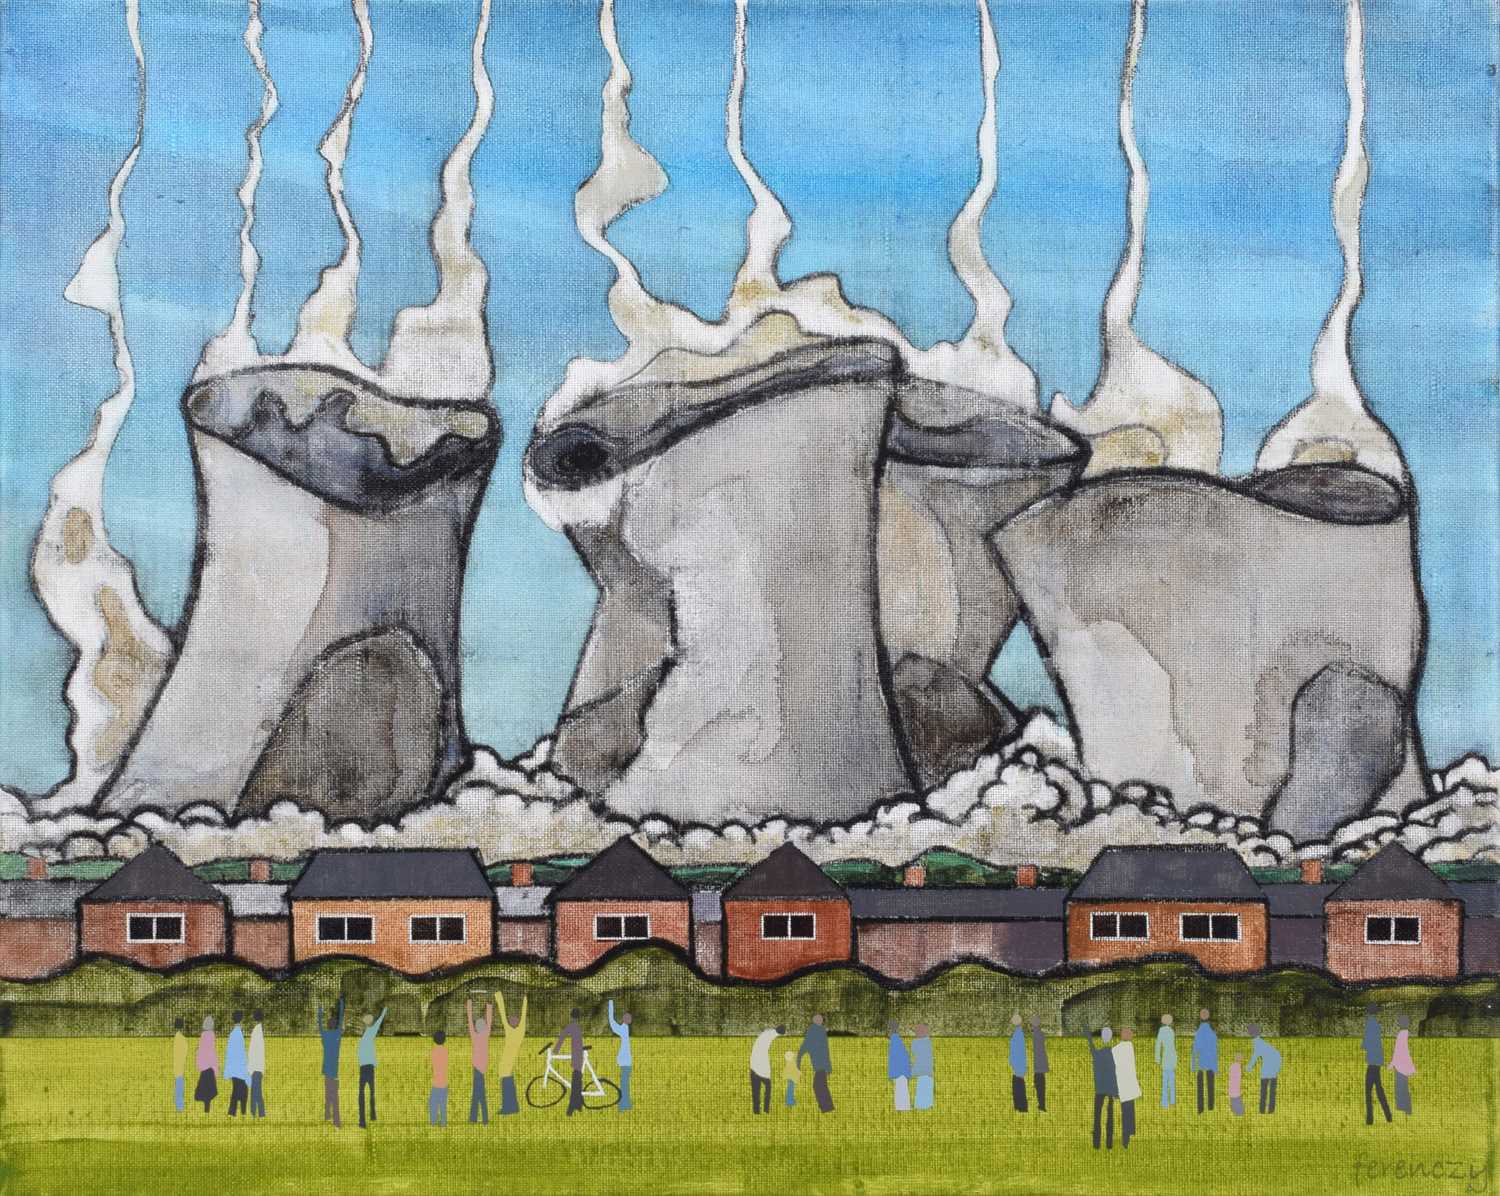 Nicholas Ferenczy (British 1959-) "Demolition: Cooling Towers, Rugeley 2021", acrylic.